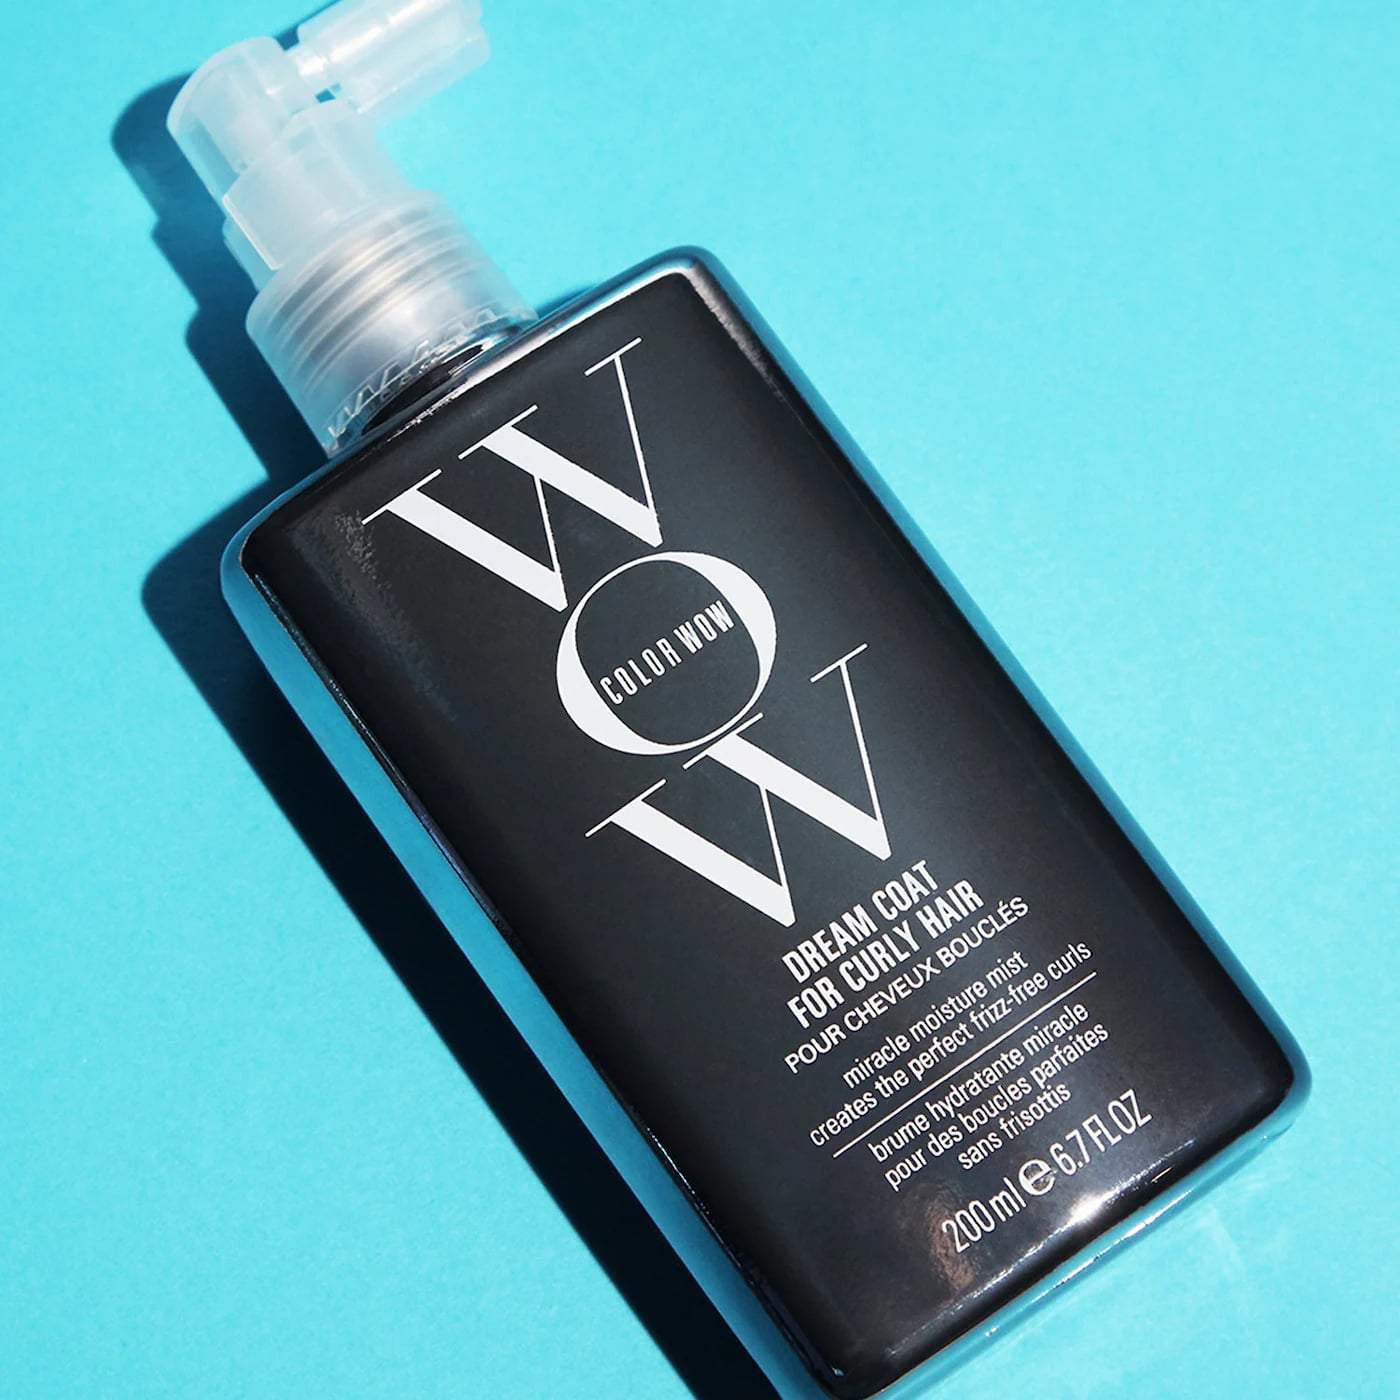 COLOR WOW DREAM COAT SUPERNATURAL SPRAY DEMO AND REVIEW